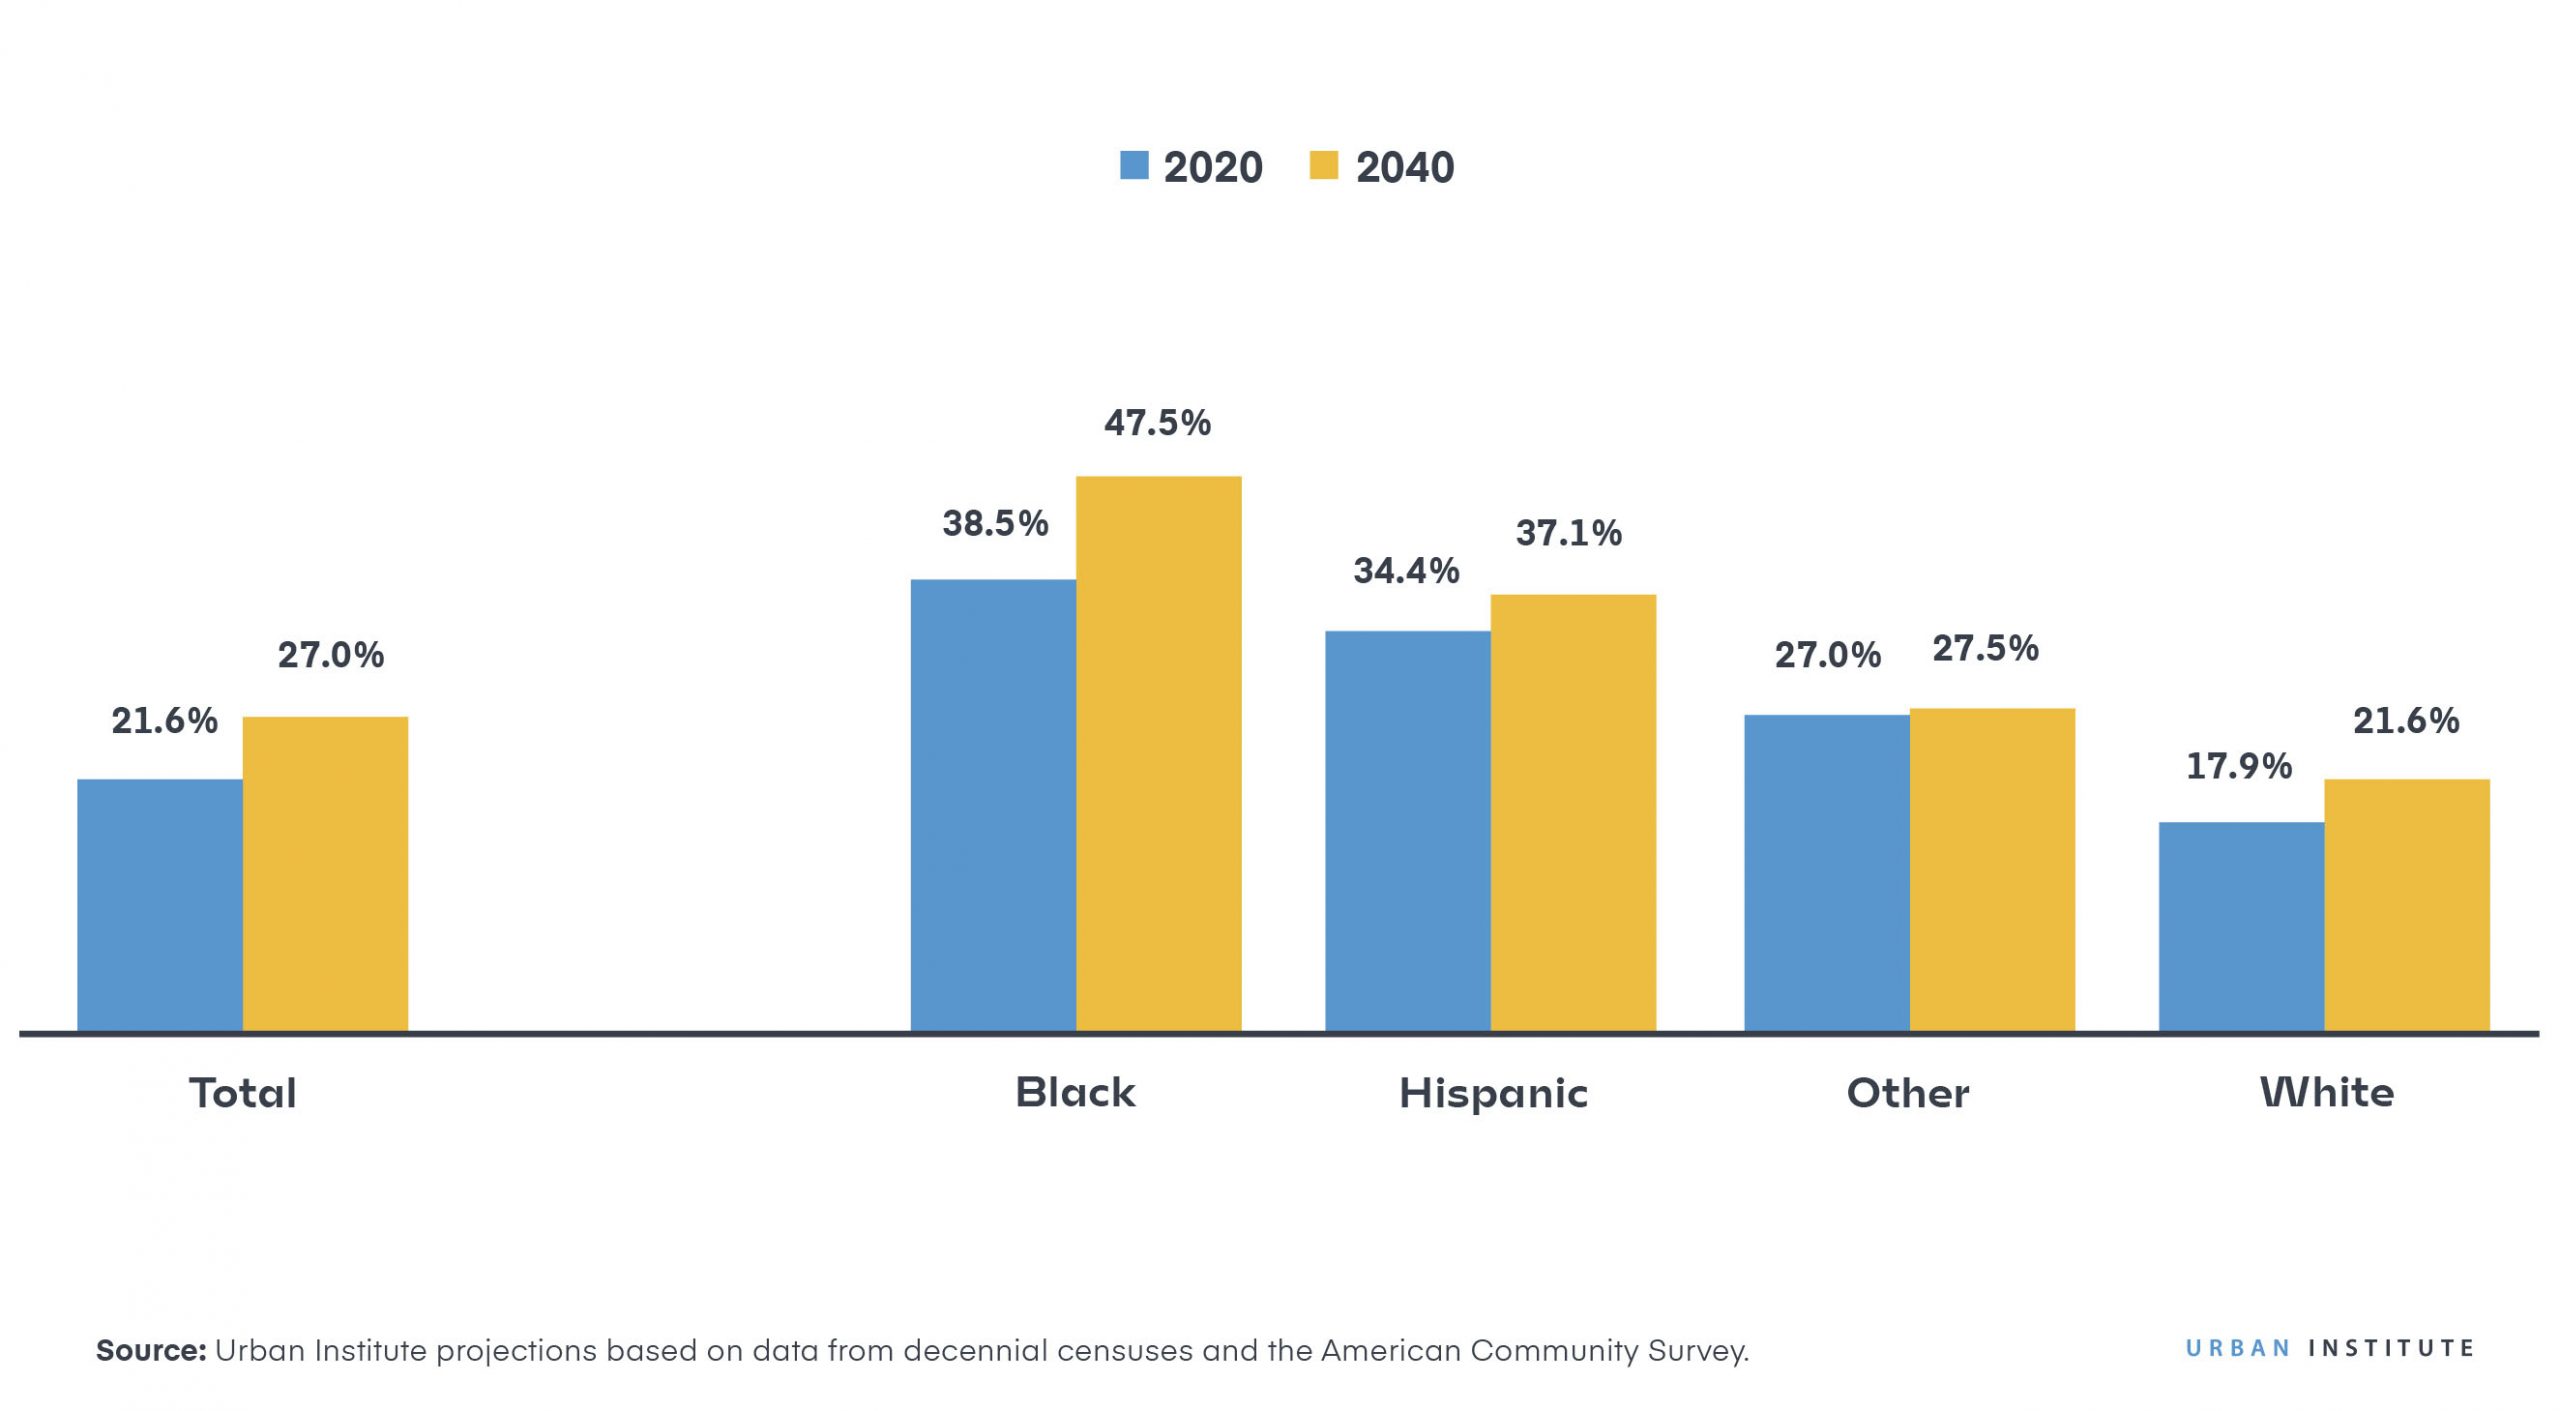 renting rate for senior househol, by race ethnicity, 2020 - 2040 - 1